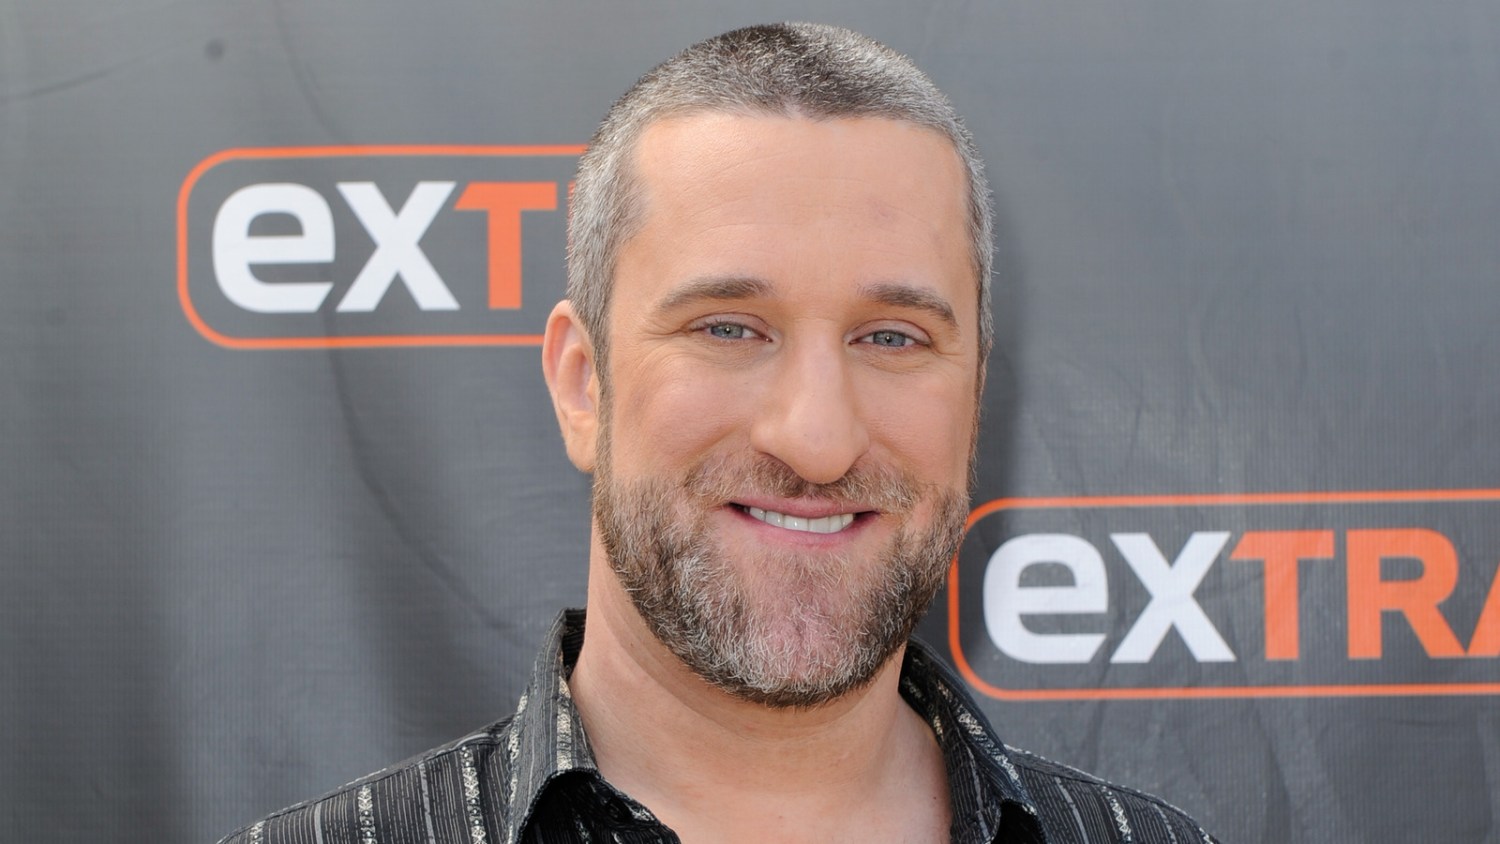 'saved by the bell' star dustin diamond dead at 44 after battle with stage 4 cancer